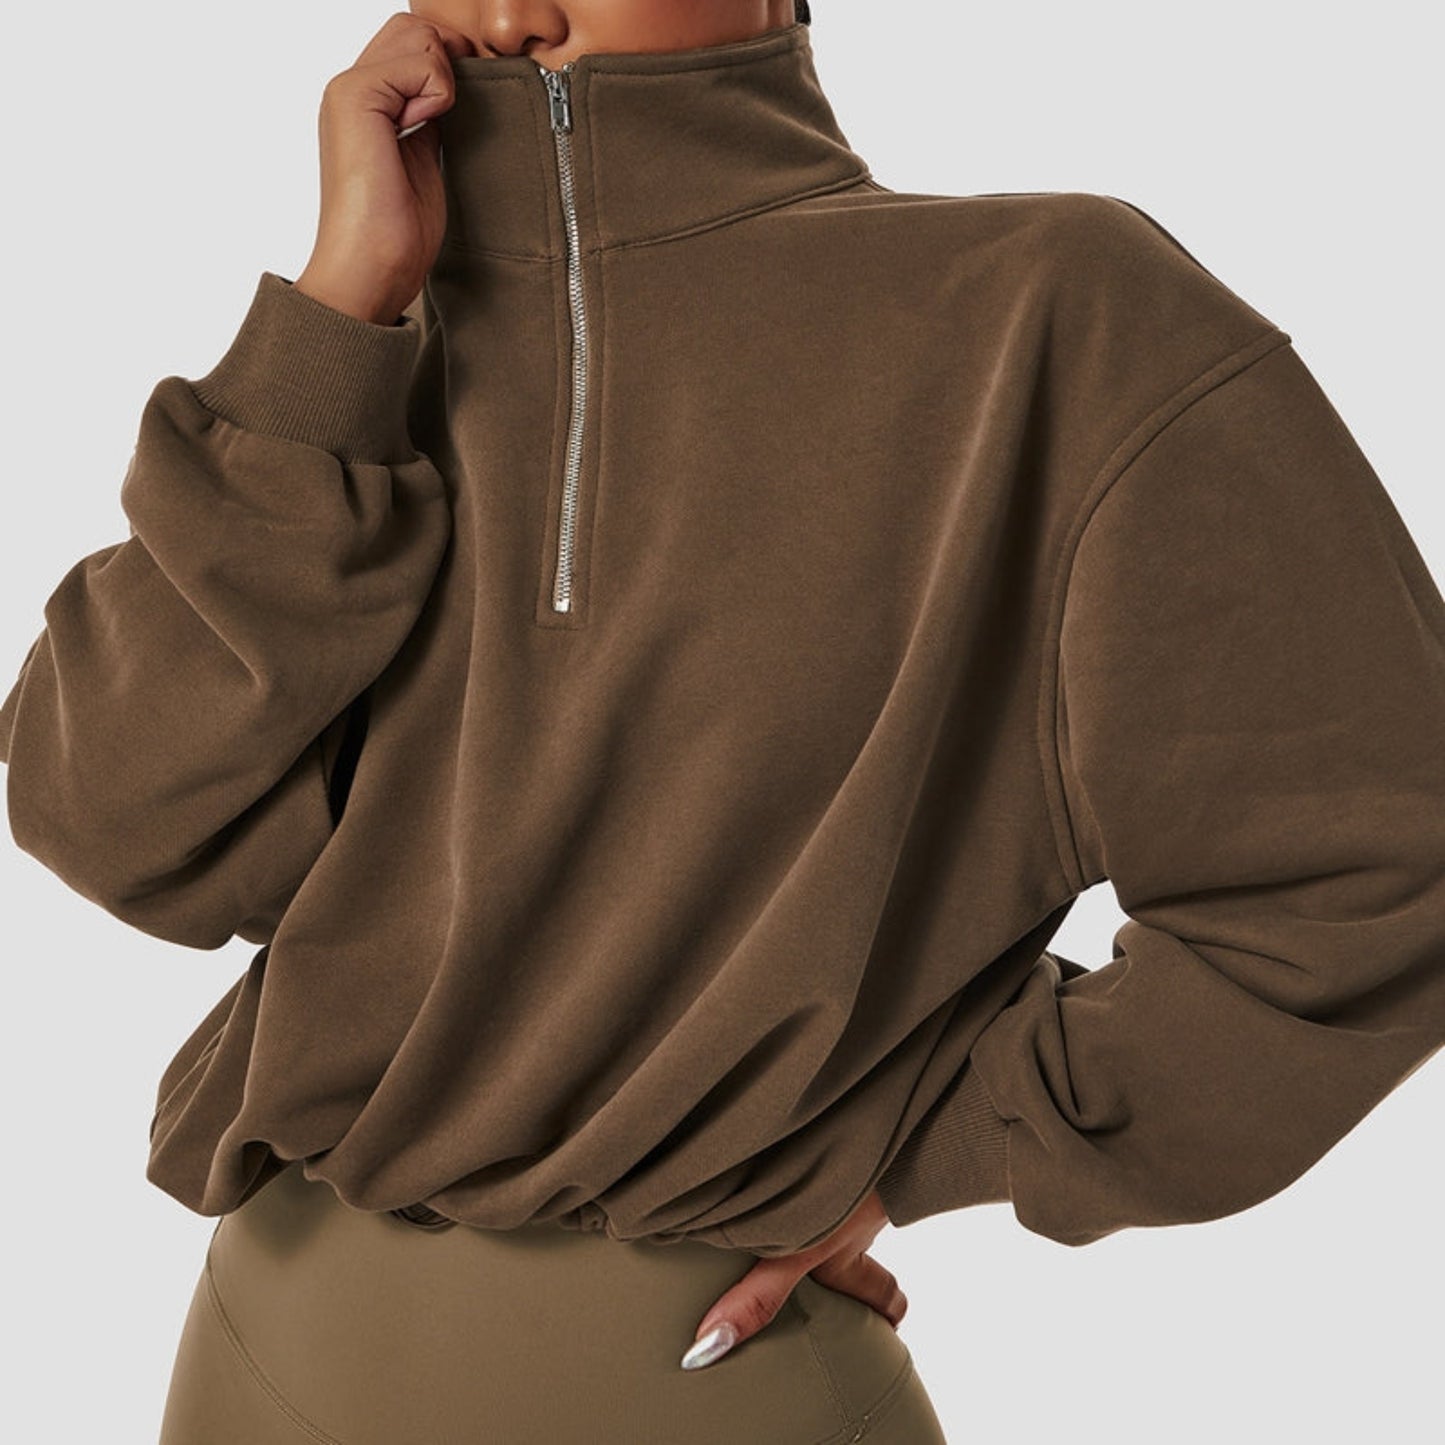 FITNESS MODEL WEARING A CHOCOLATE BROWN, CROPPED, PAPER BAG SWEAT SHIRT  WITH FRONT NECK ZIPPER OPENING FROM VIBRAS ACTIVEWEAR.